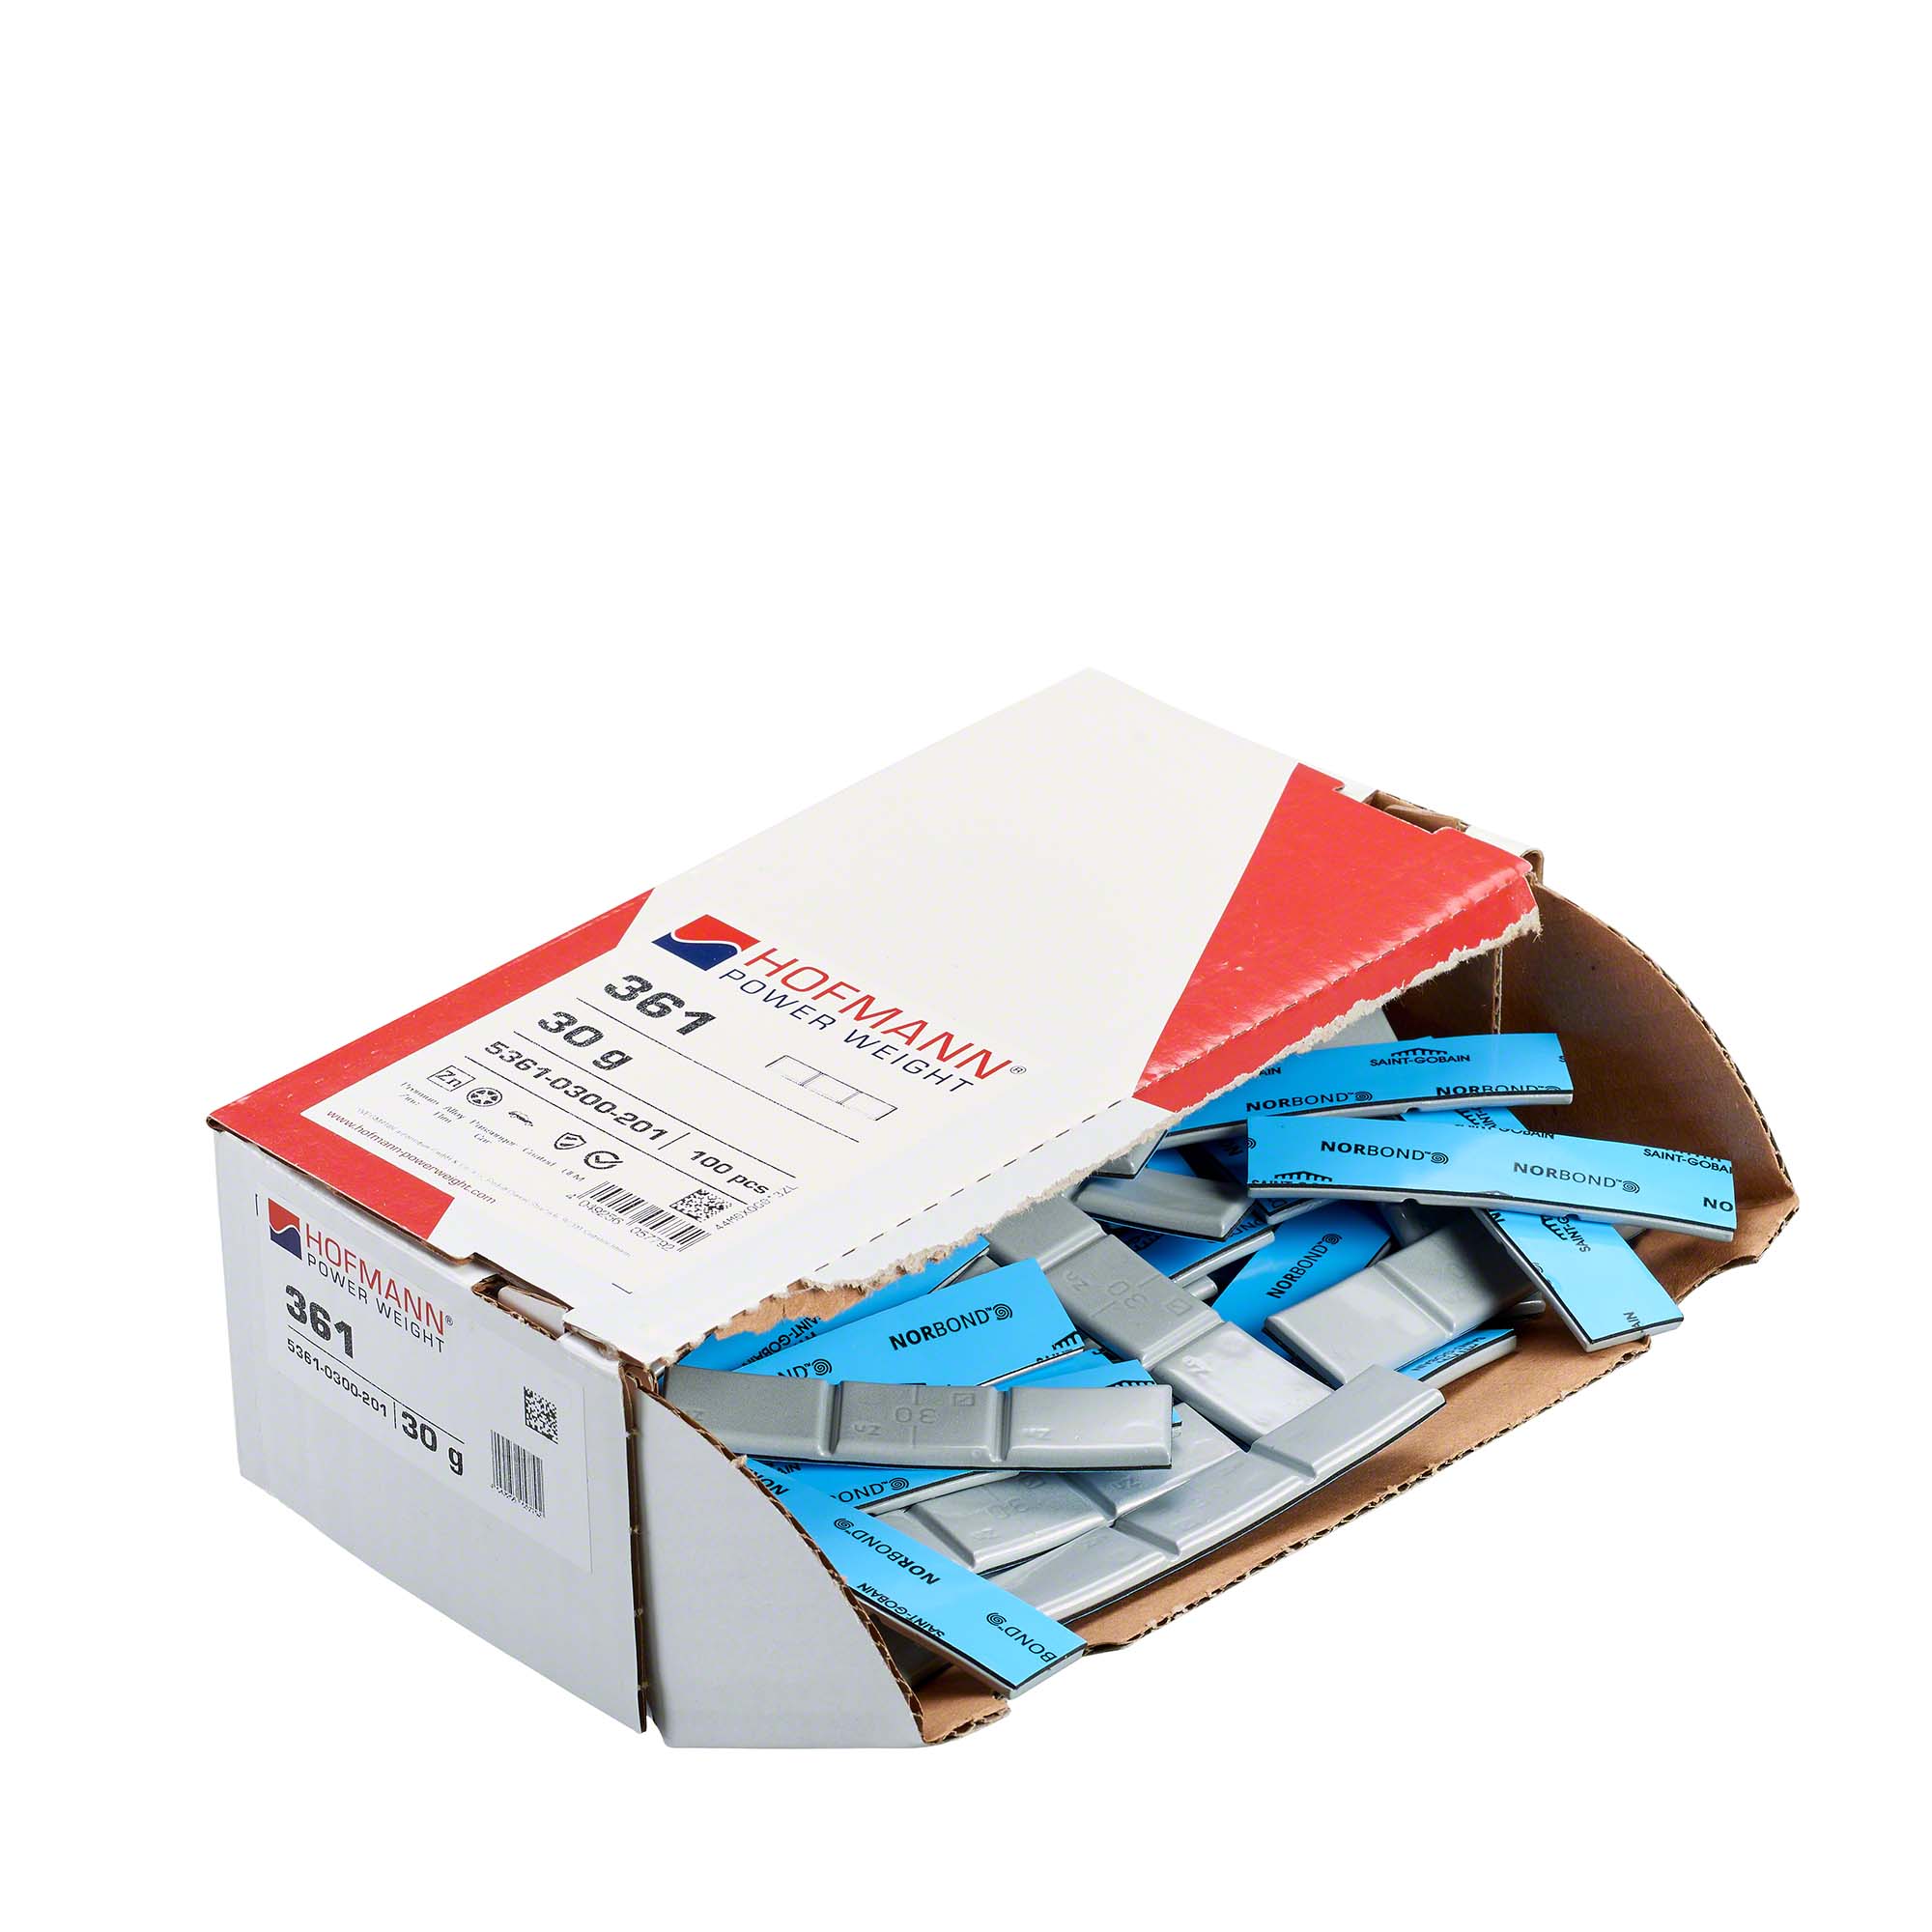 adhesive weight - Typ 361, 30 g, zinc, silver